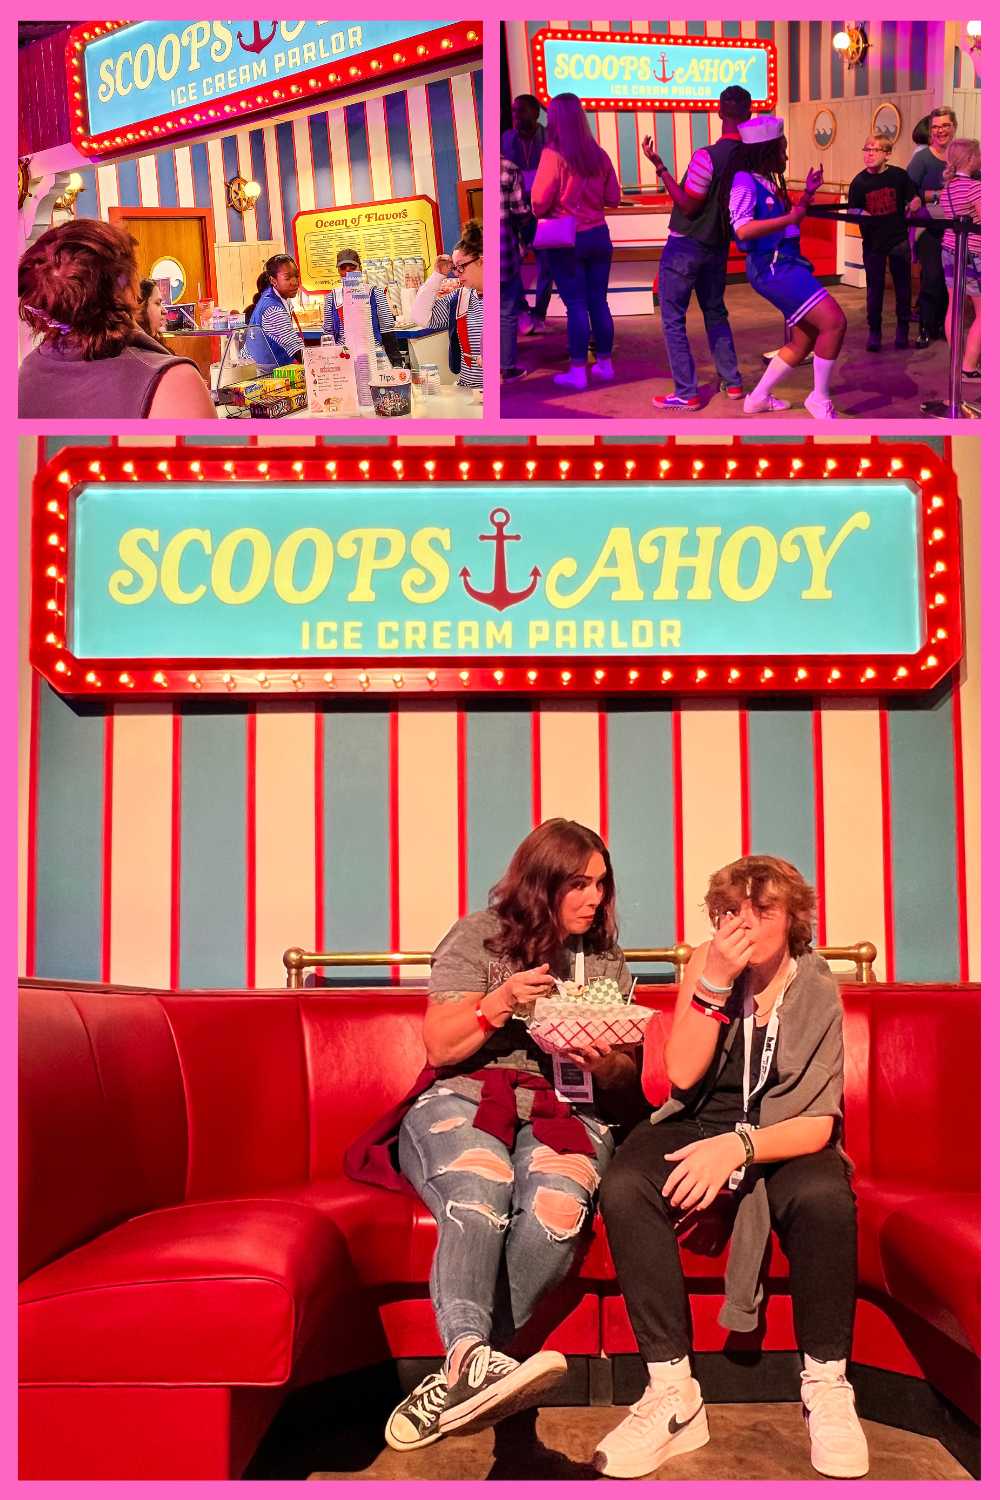 Stranger Things Experience Review, Scoops Ahoy